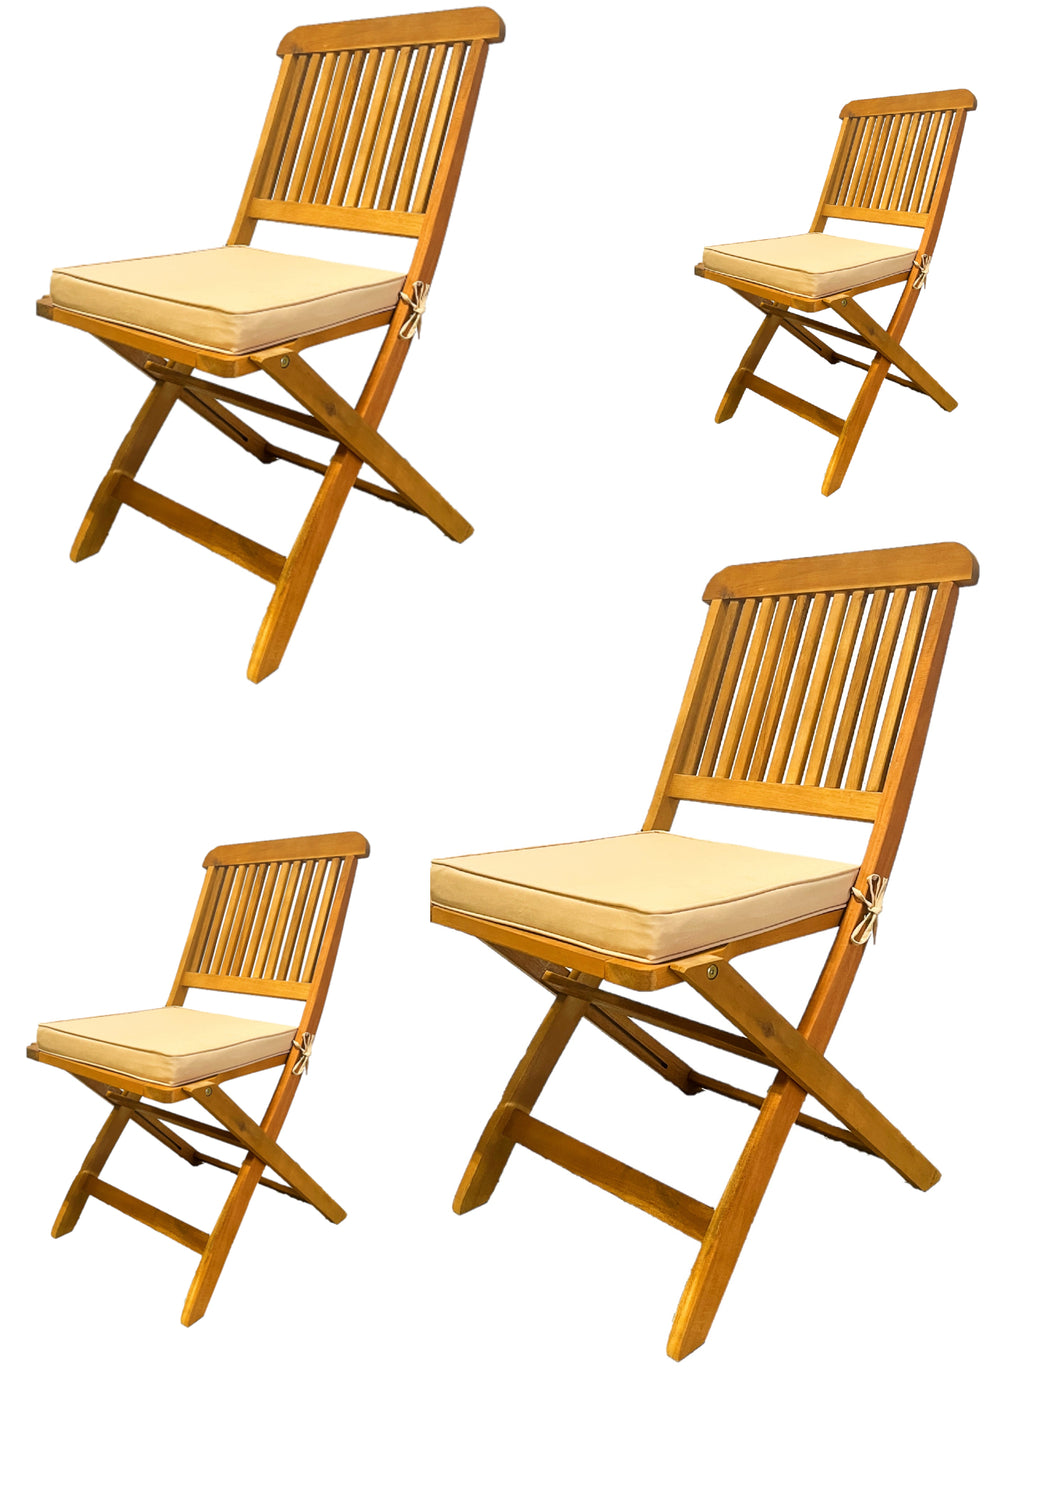 BTExpert 4 Patio Fully Assembled Outdoor Acacia Wood Solid Outdoor Wood Folding Chair, Teak Finish, Tan Cushions, Patio, Garden